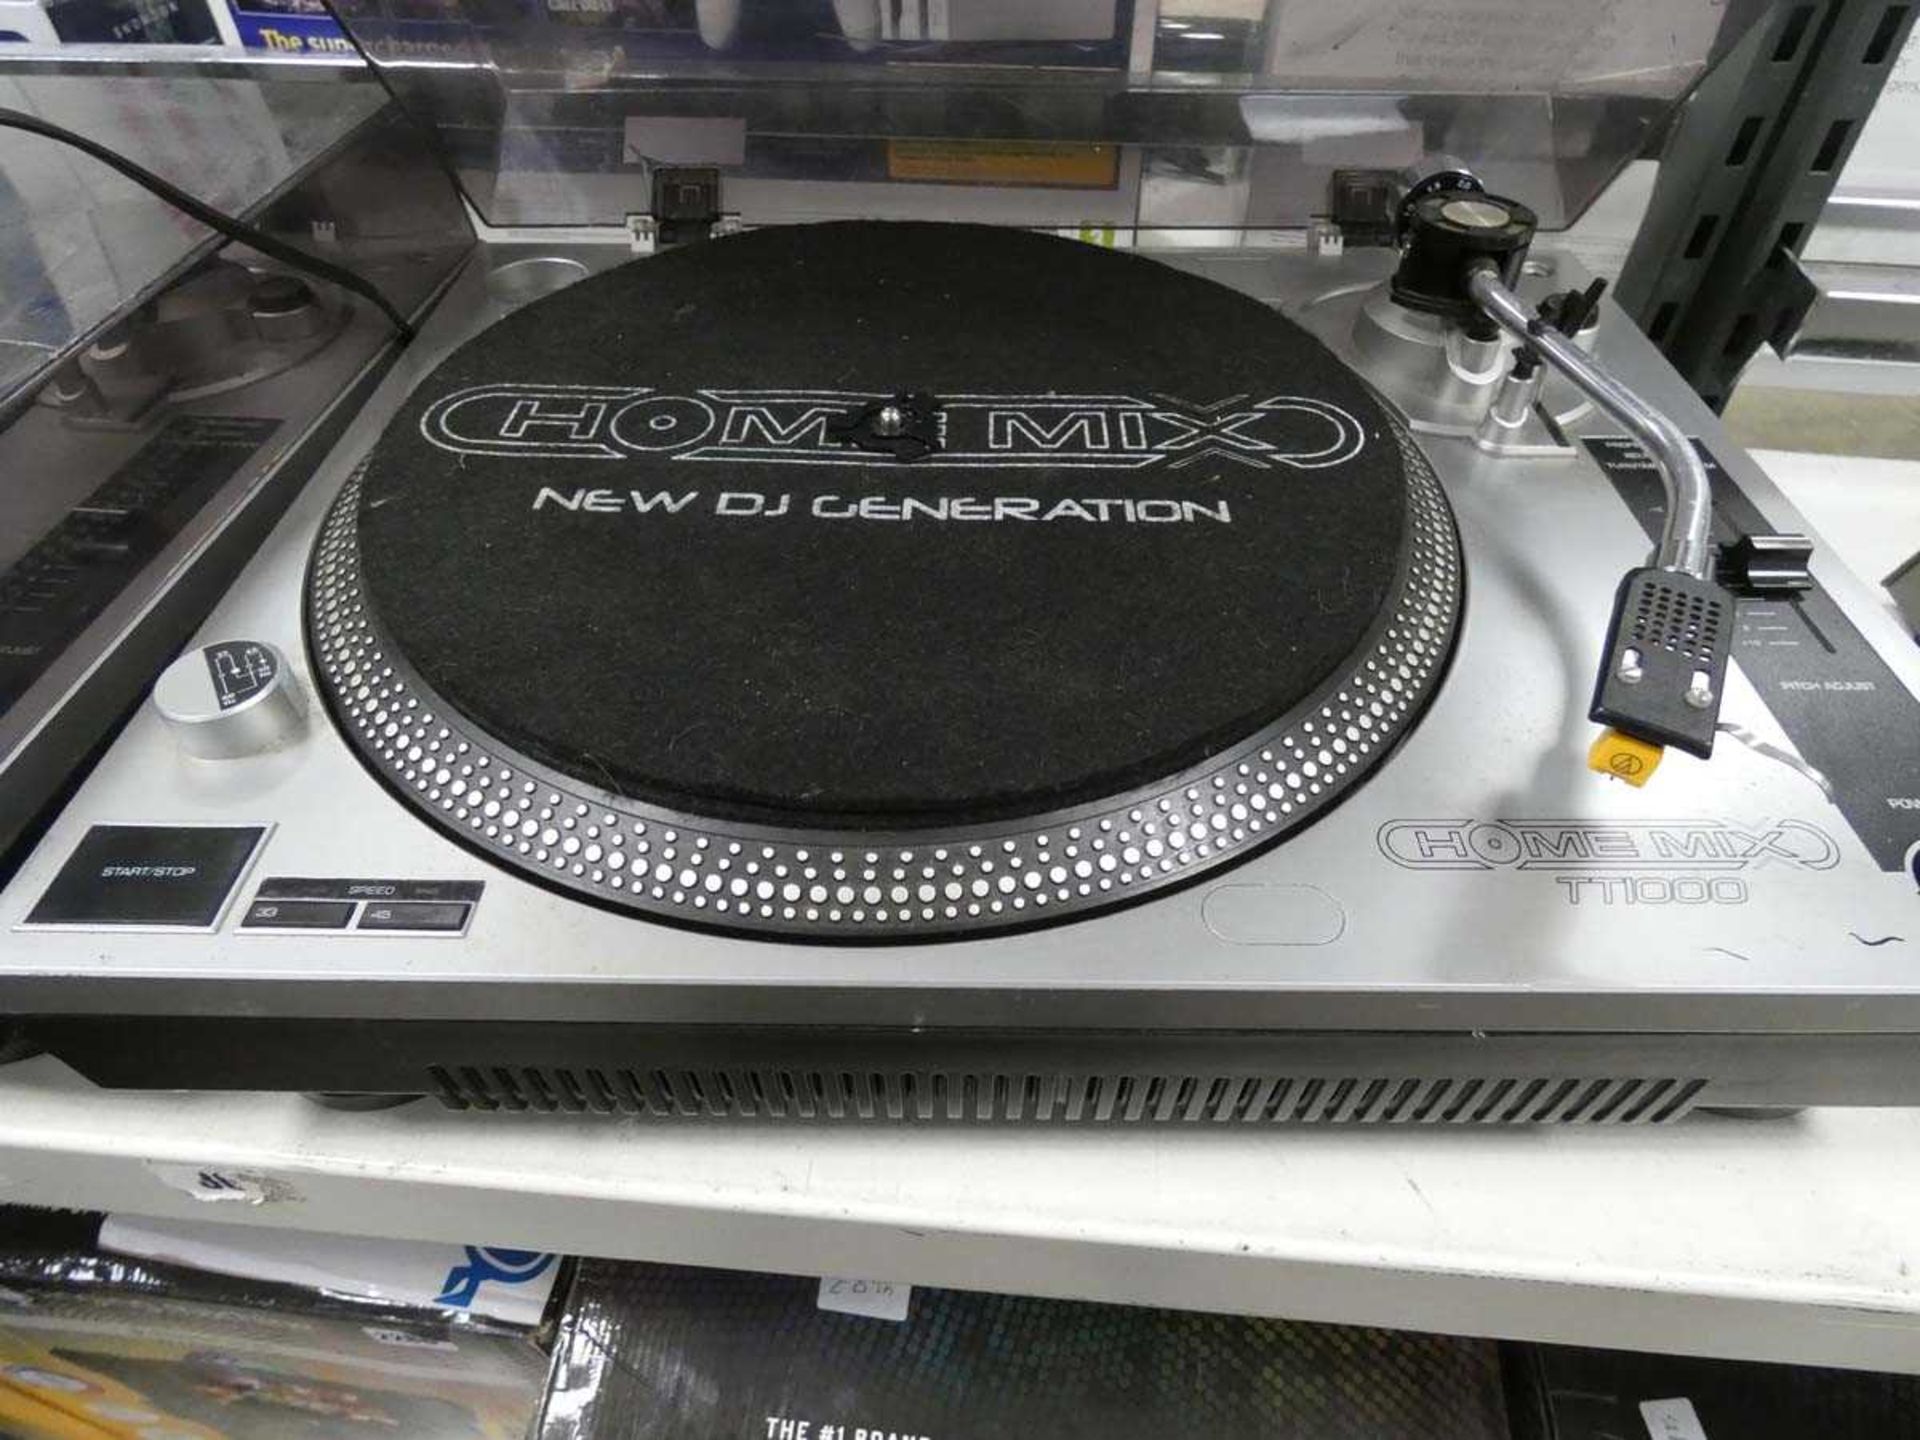 2 Home Mix TT1000 turntables - Image 3 of 5